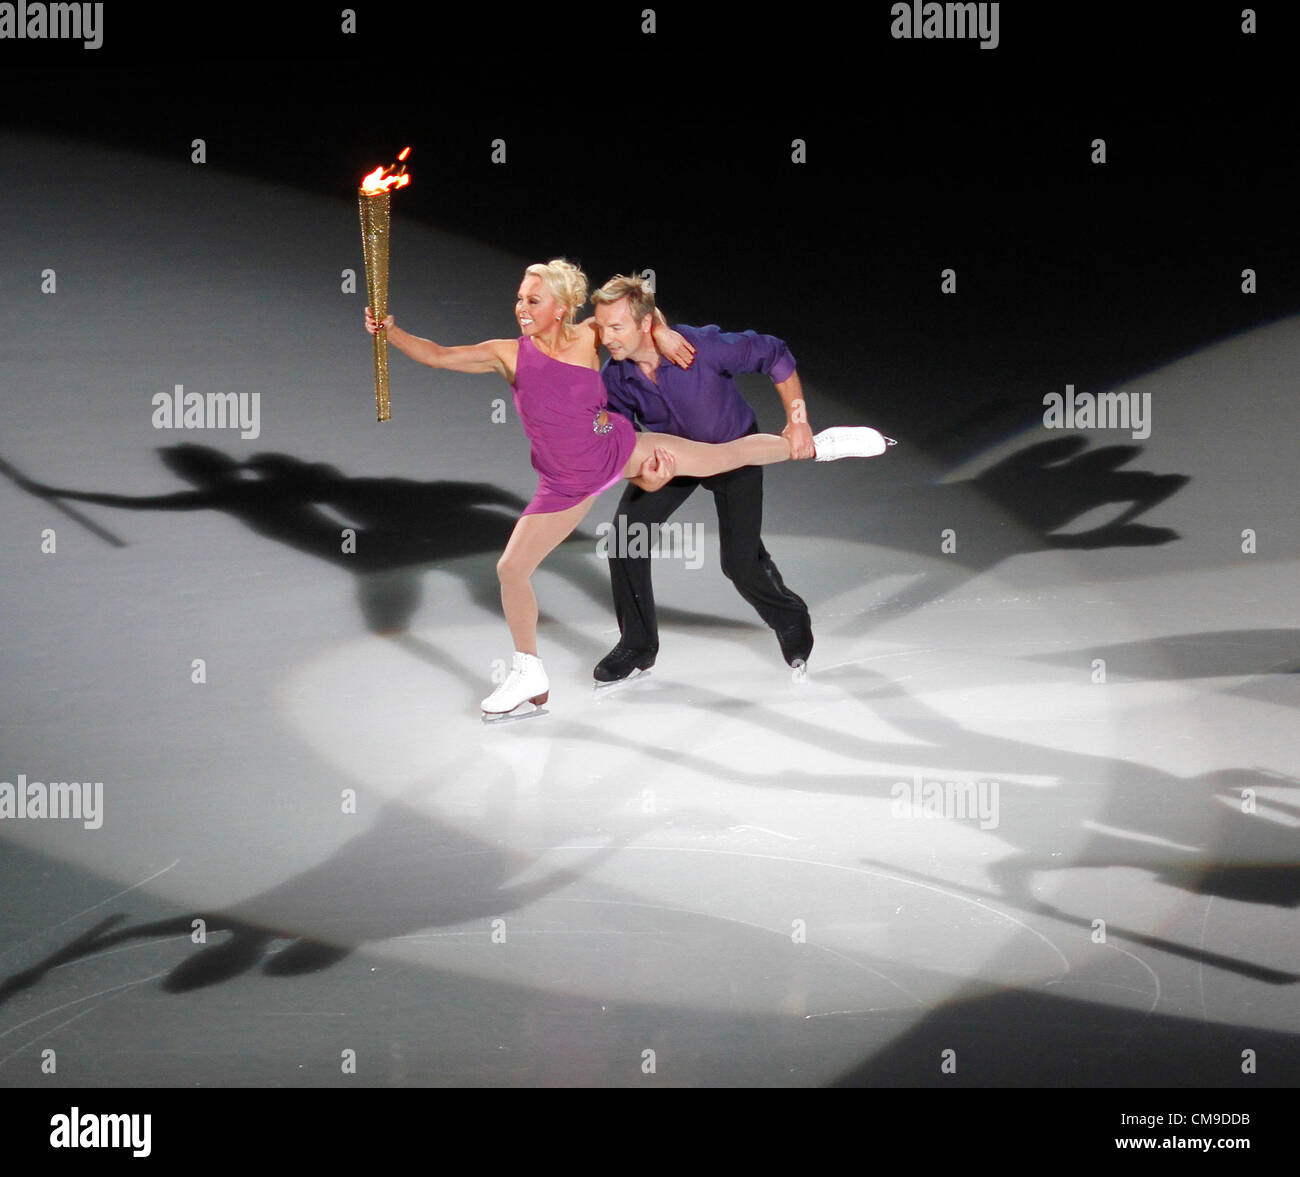 Nottingham, UK. 28 June, 2012. Jayne Torvill OBE and Christopher Dean OBE, 1984 Olympic Dance Champions, take the Olympic flame at the National Ice Centre Stock Photo